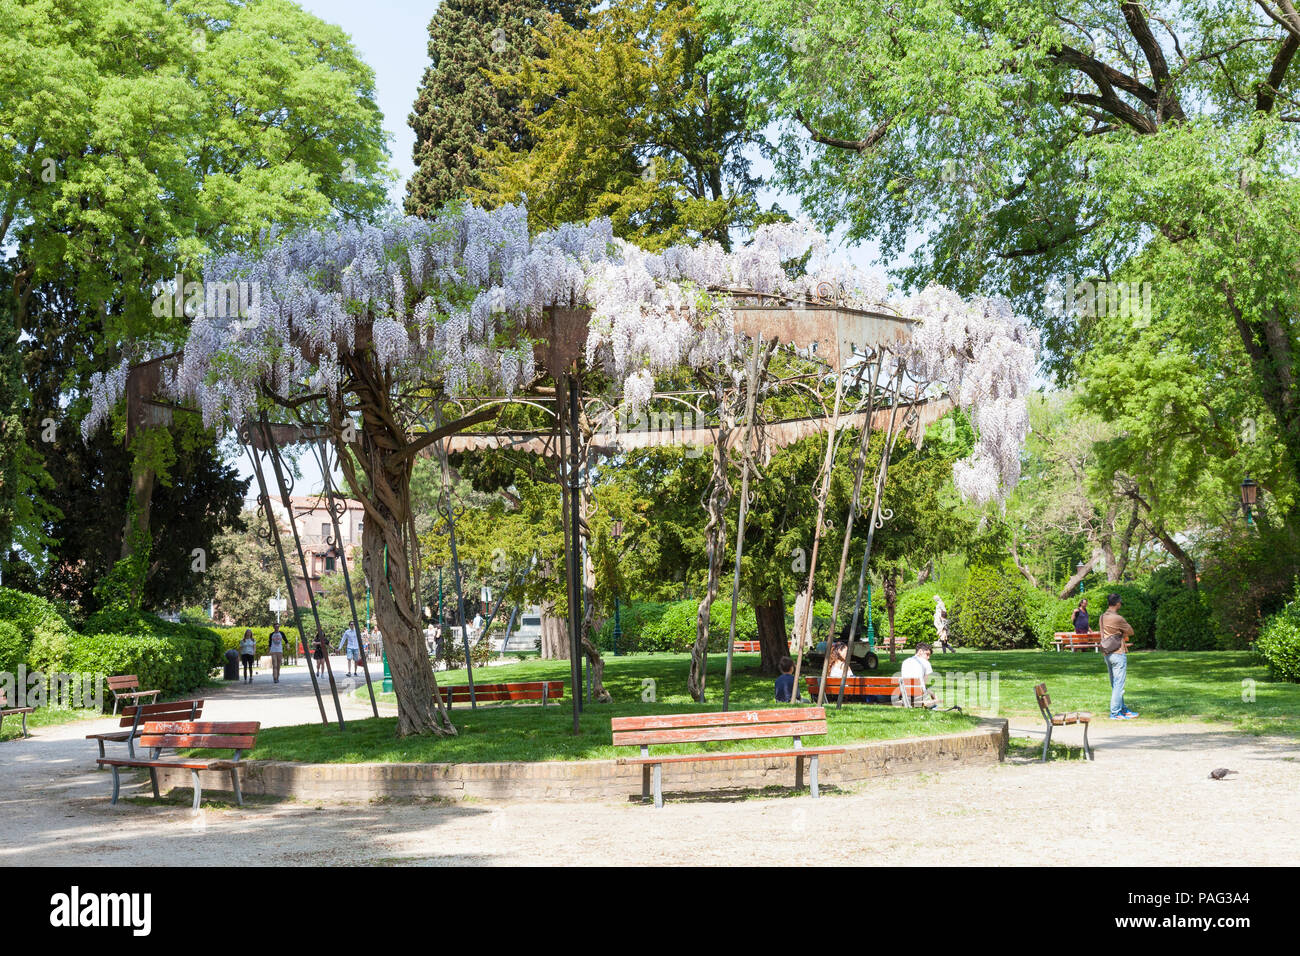 The historic bandstand in Giardini Pubblici  or Public Gardens covered in wisteria flowers in spring, Castello, Venice, Veneto, Italy. People relaxing Stock Photo